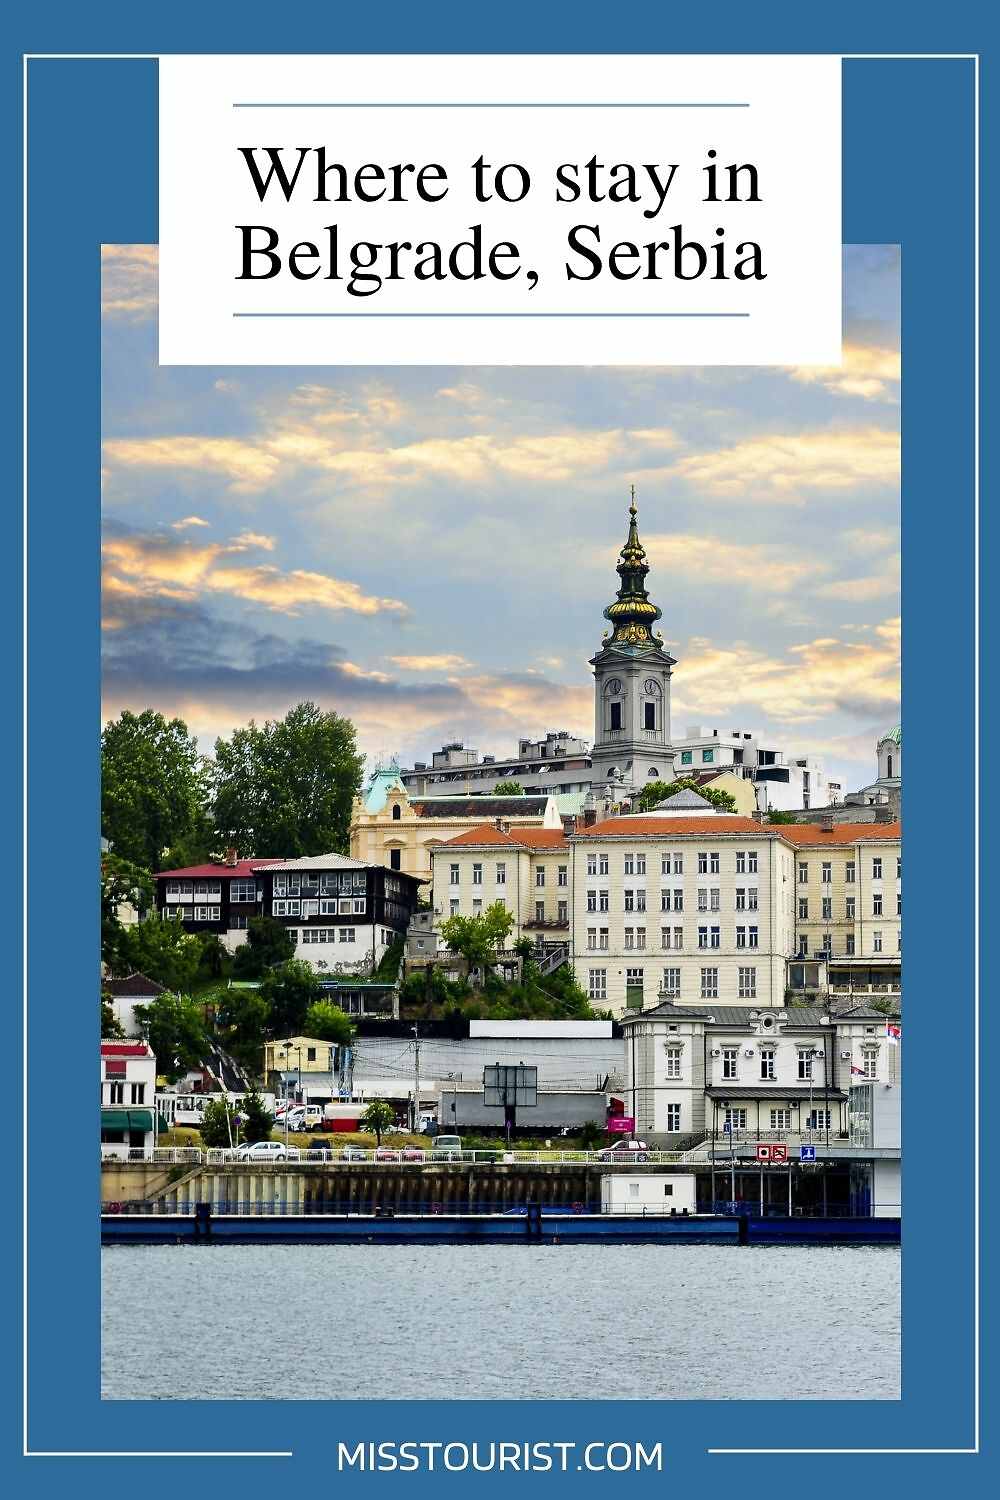 The image shows a picturesque view of Belgrade, Serbia, with historic buildings and trees under a partly cloudy sky. Text at the top reads, "Where to stay in Belgrade, Serbia.